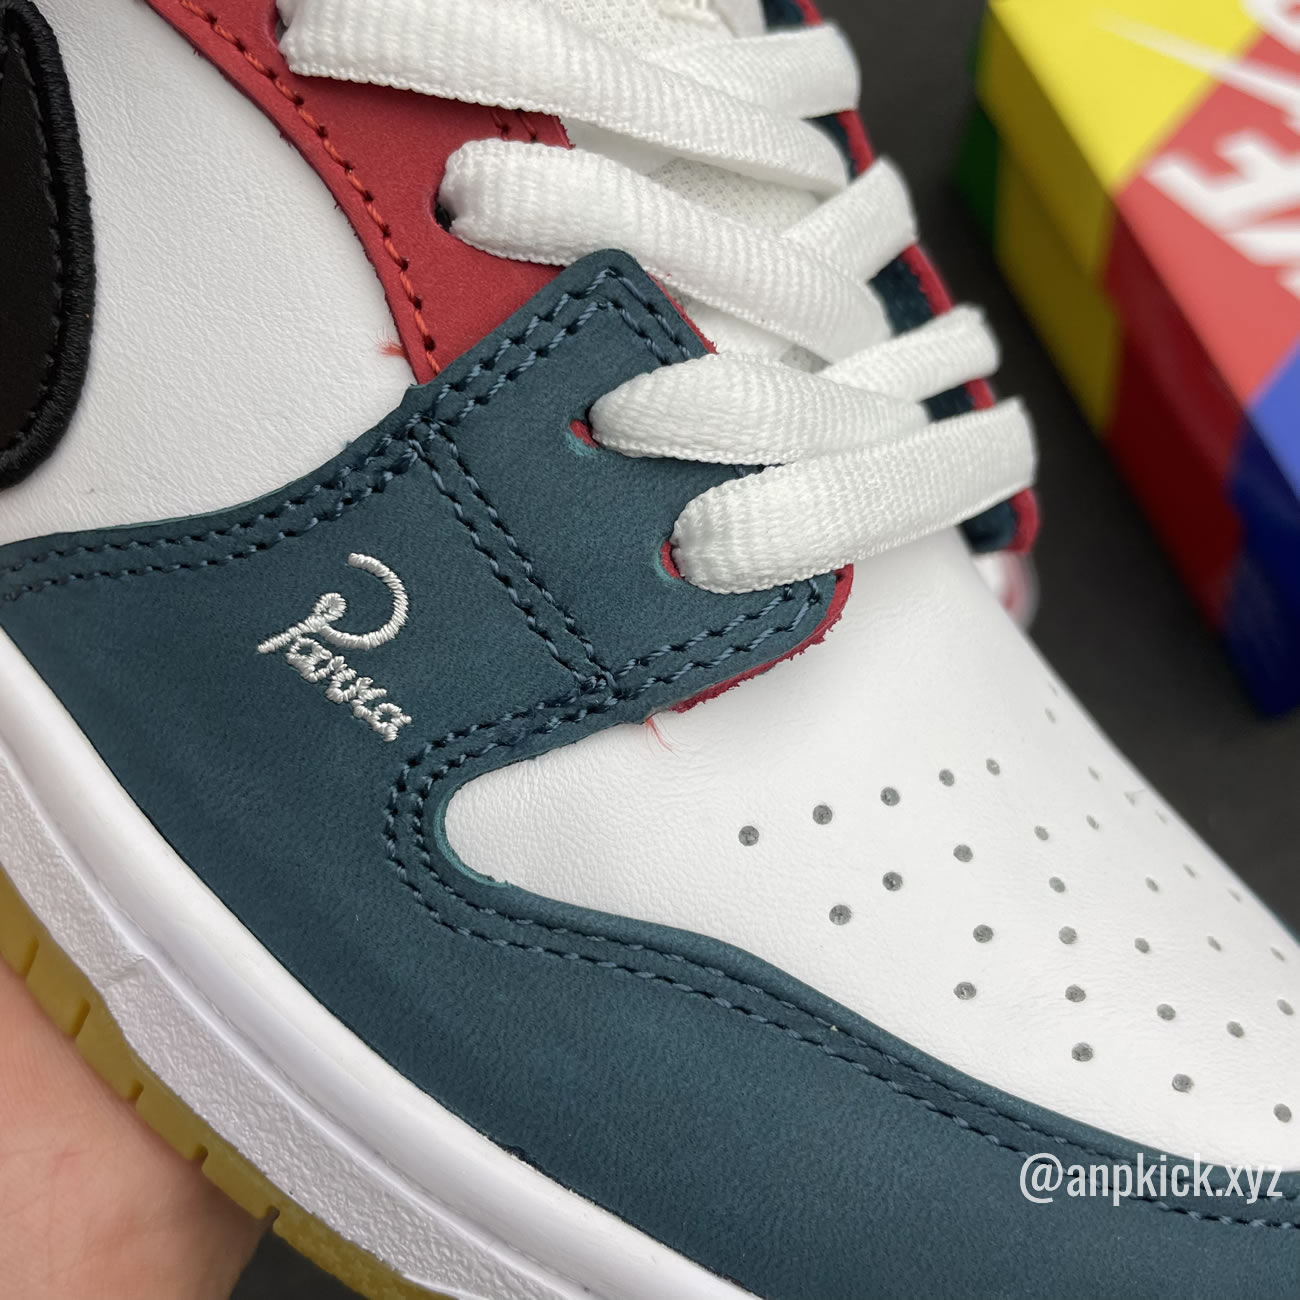 Parra Nike Sb Dunk Low Collab Summer 2021 Colorway Surfaces Dh7695 100 (5) - newkick.org